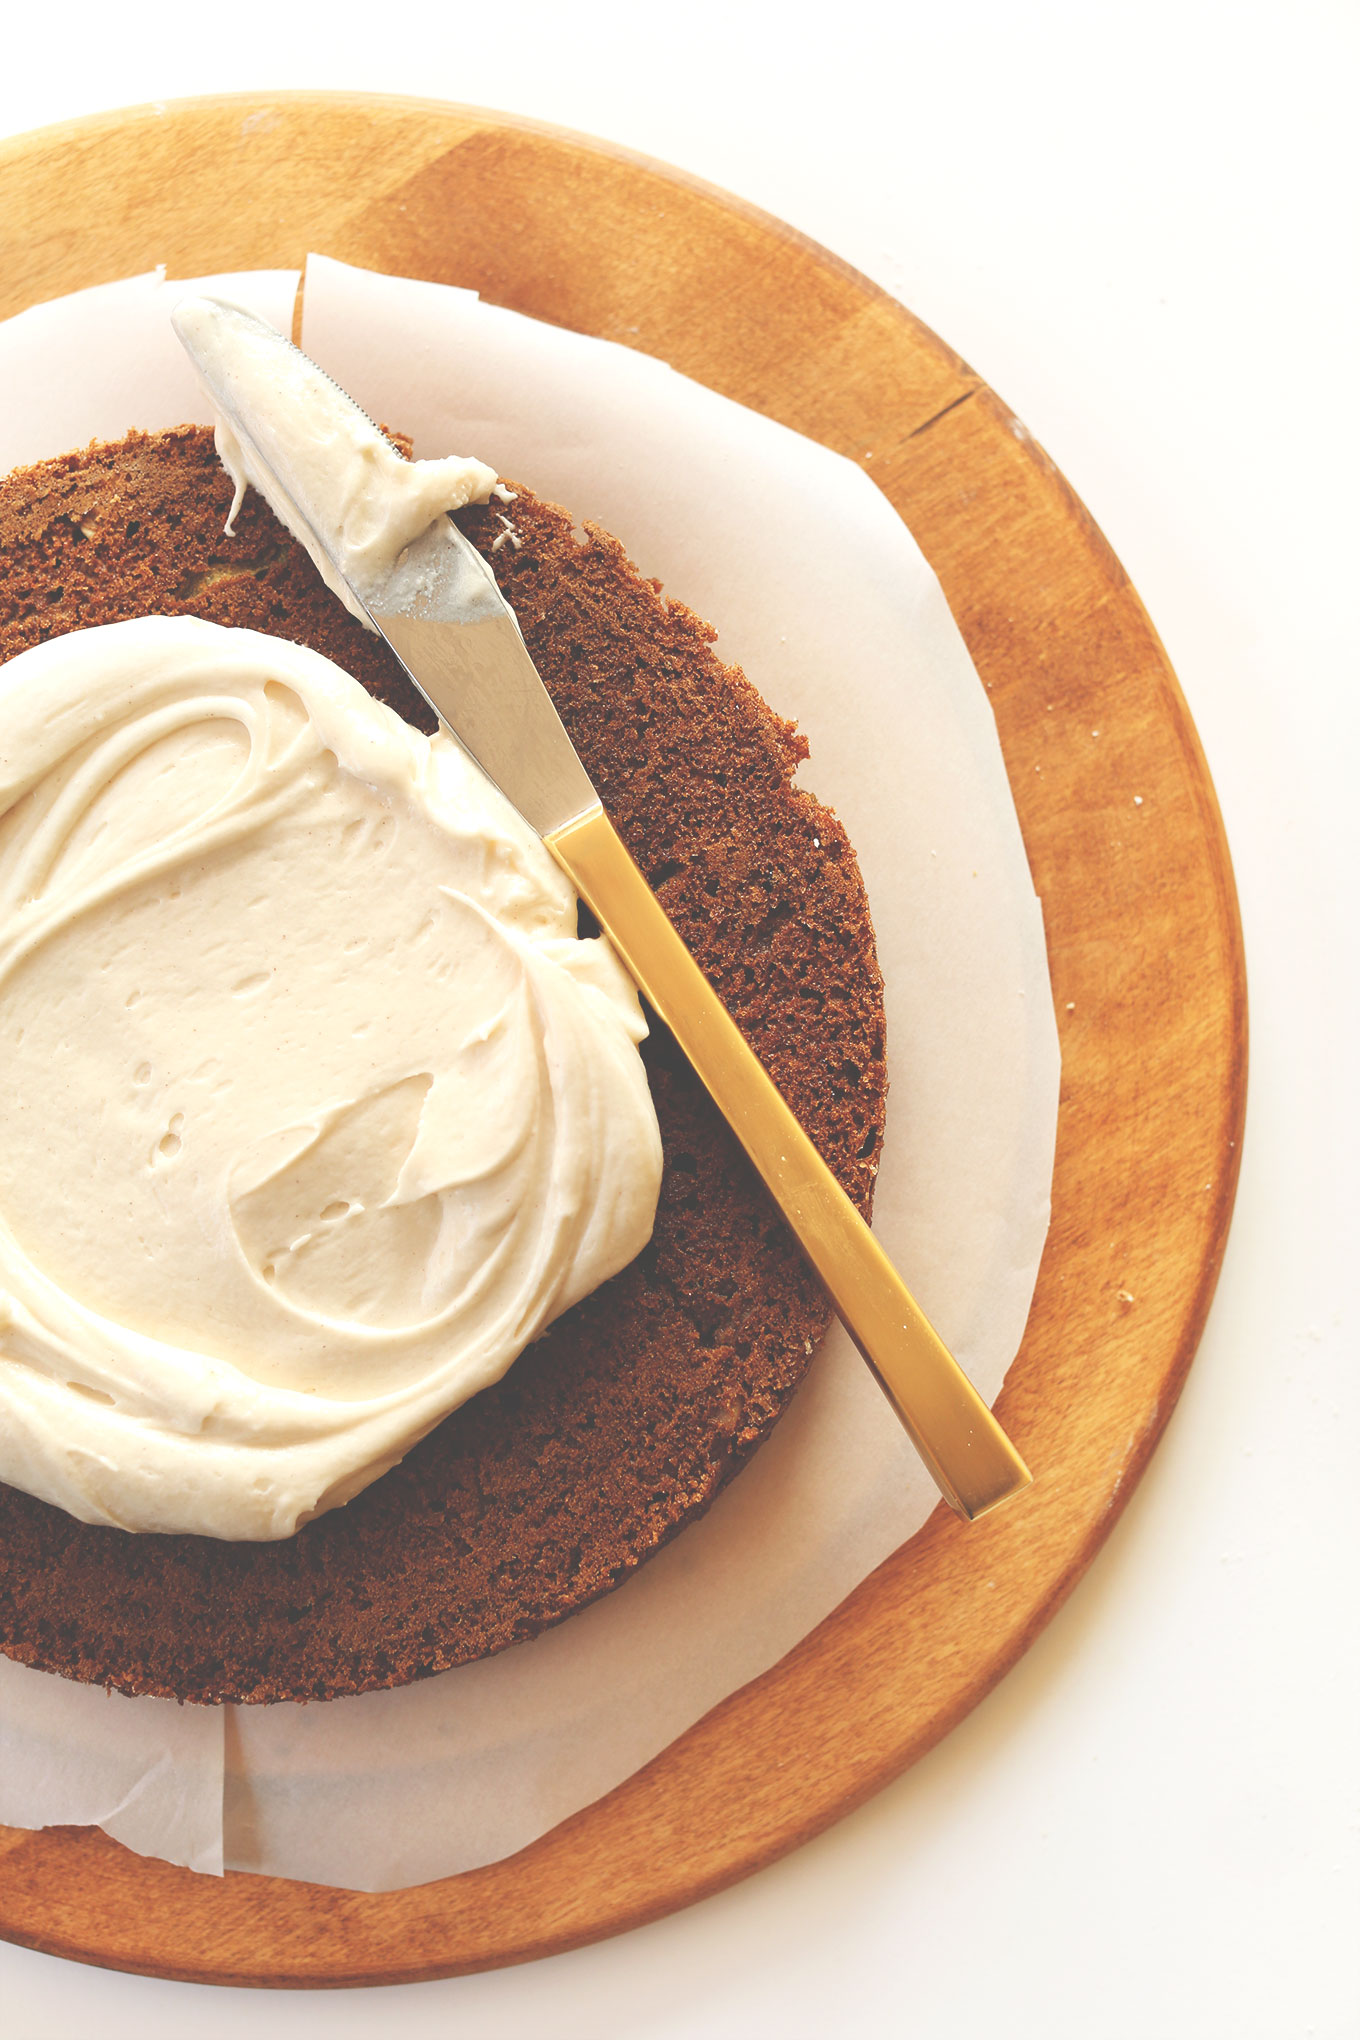 Spreading Vegan Cream Cheese Frosting over our Apple Gingerbread Cake